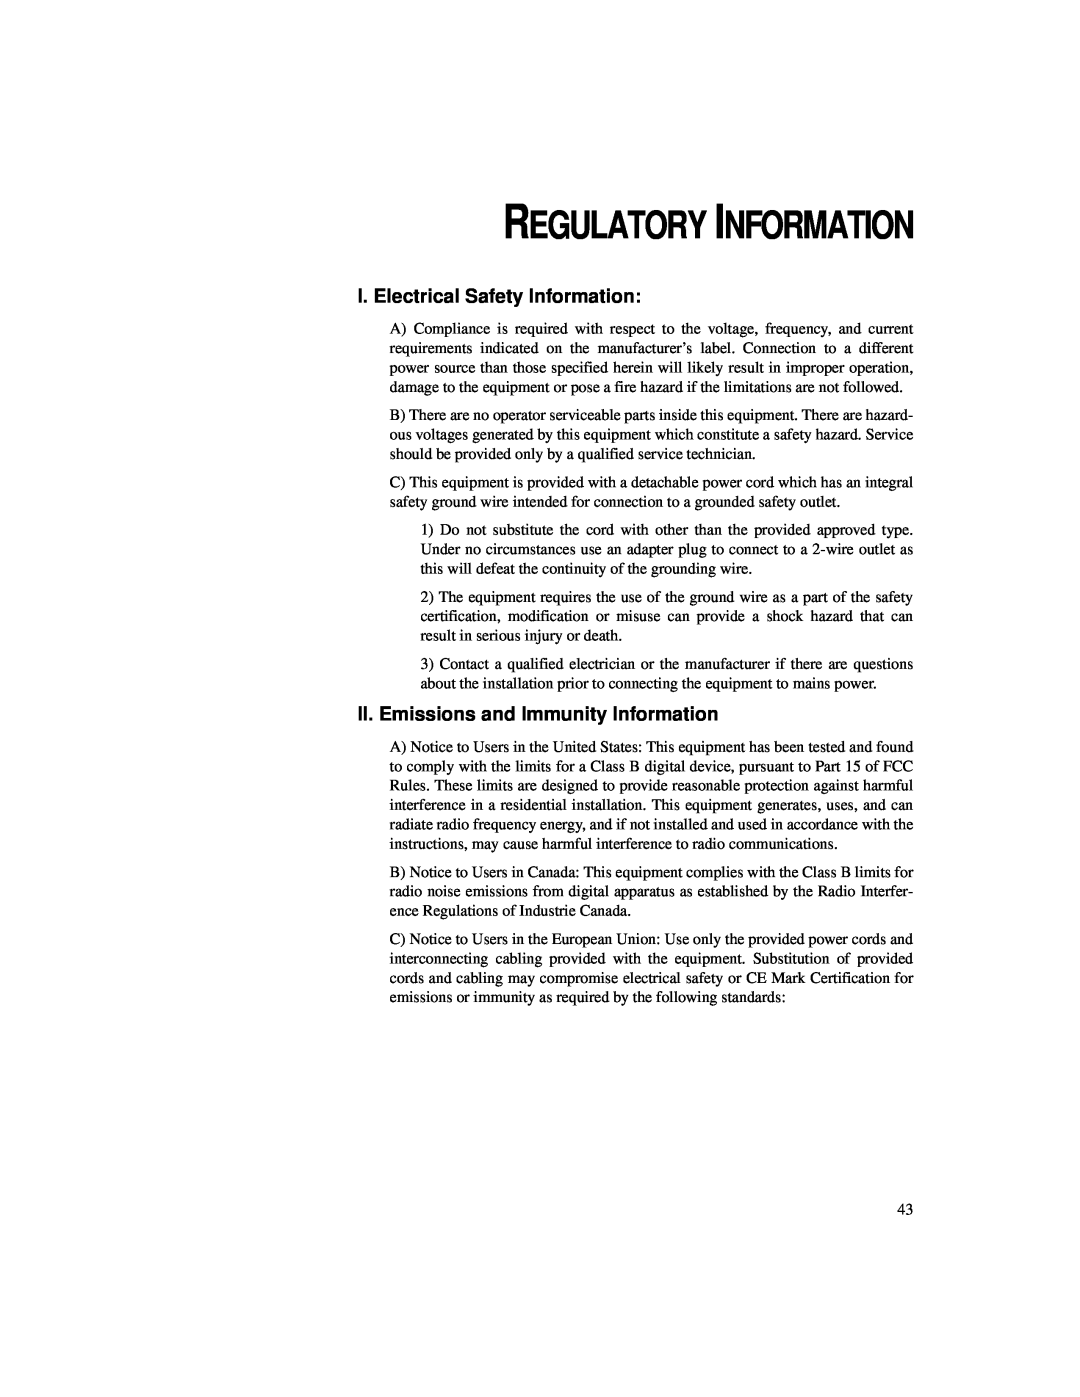 Elo TouchSystems 1925L Regulatory Information, I. Electrical Safety Information, II. Emissions and Immunity Information 